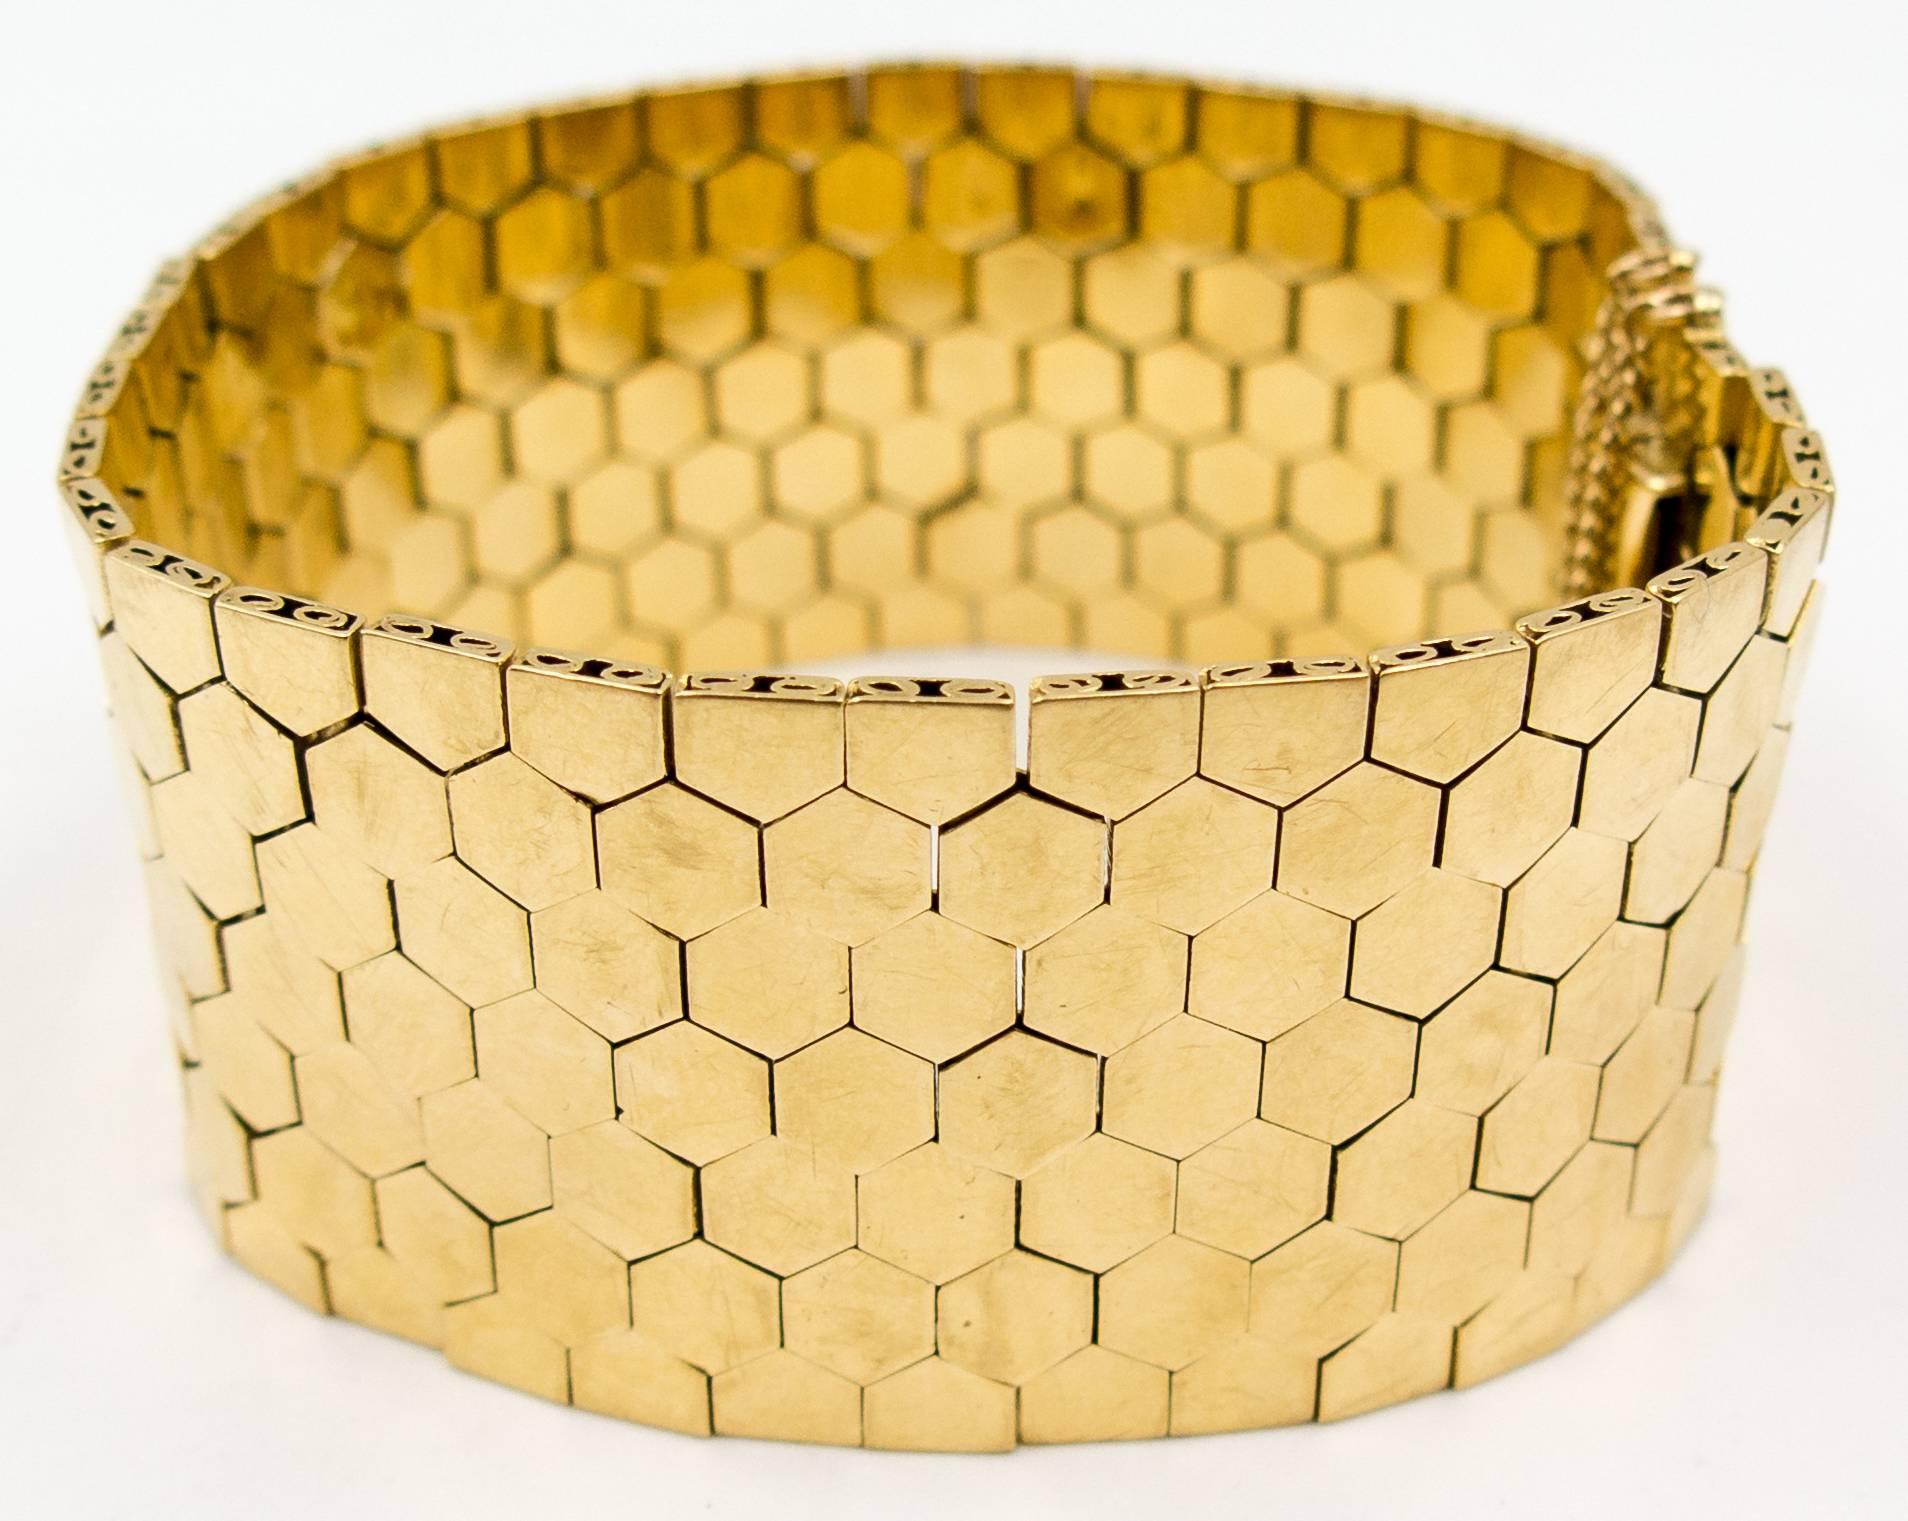 A simple but strongly designed 18 karat gold bracelet of interconnected gold hexagonal plaques that smoothly slide against the wearer's skin.   The bracelet measures 7 1/2 inches in length and is 1 1/8 inches deep, and there's a deeply satisfying